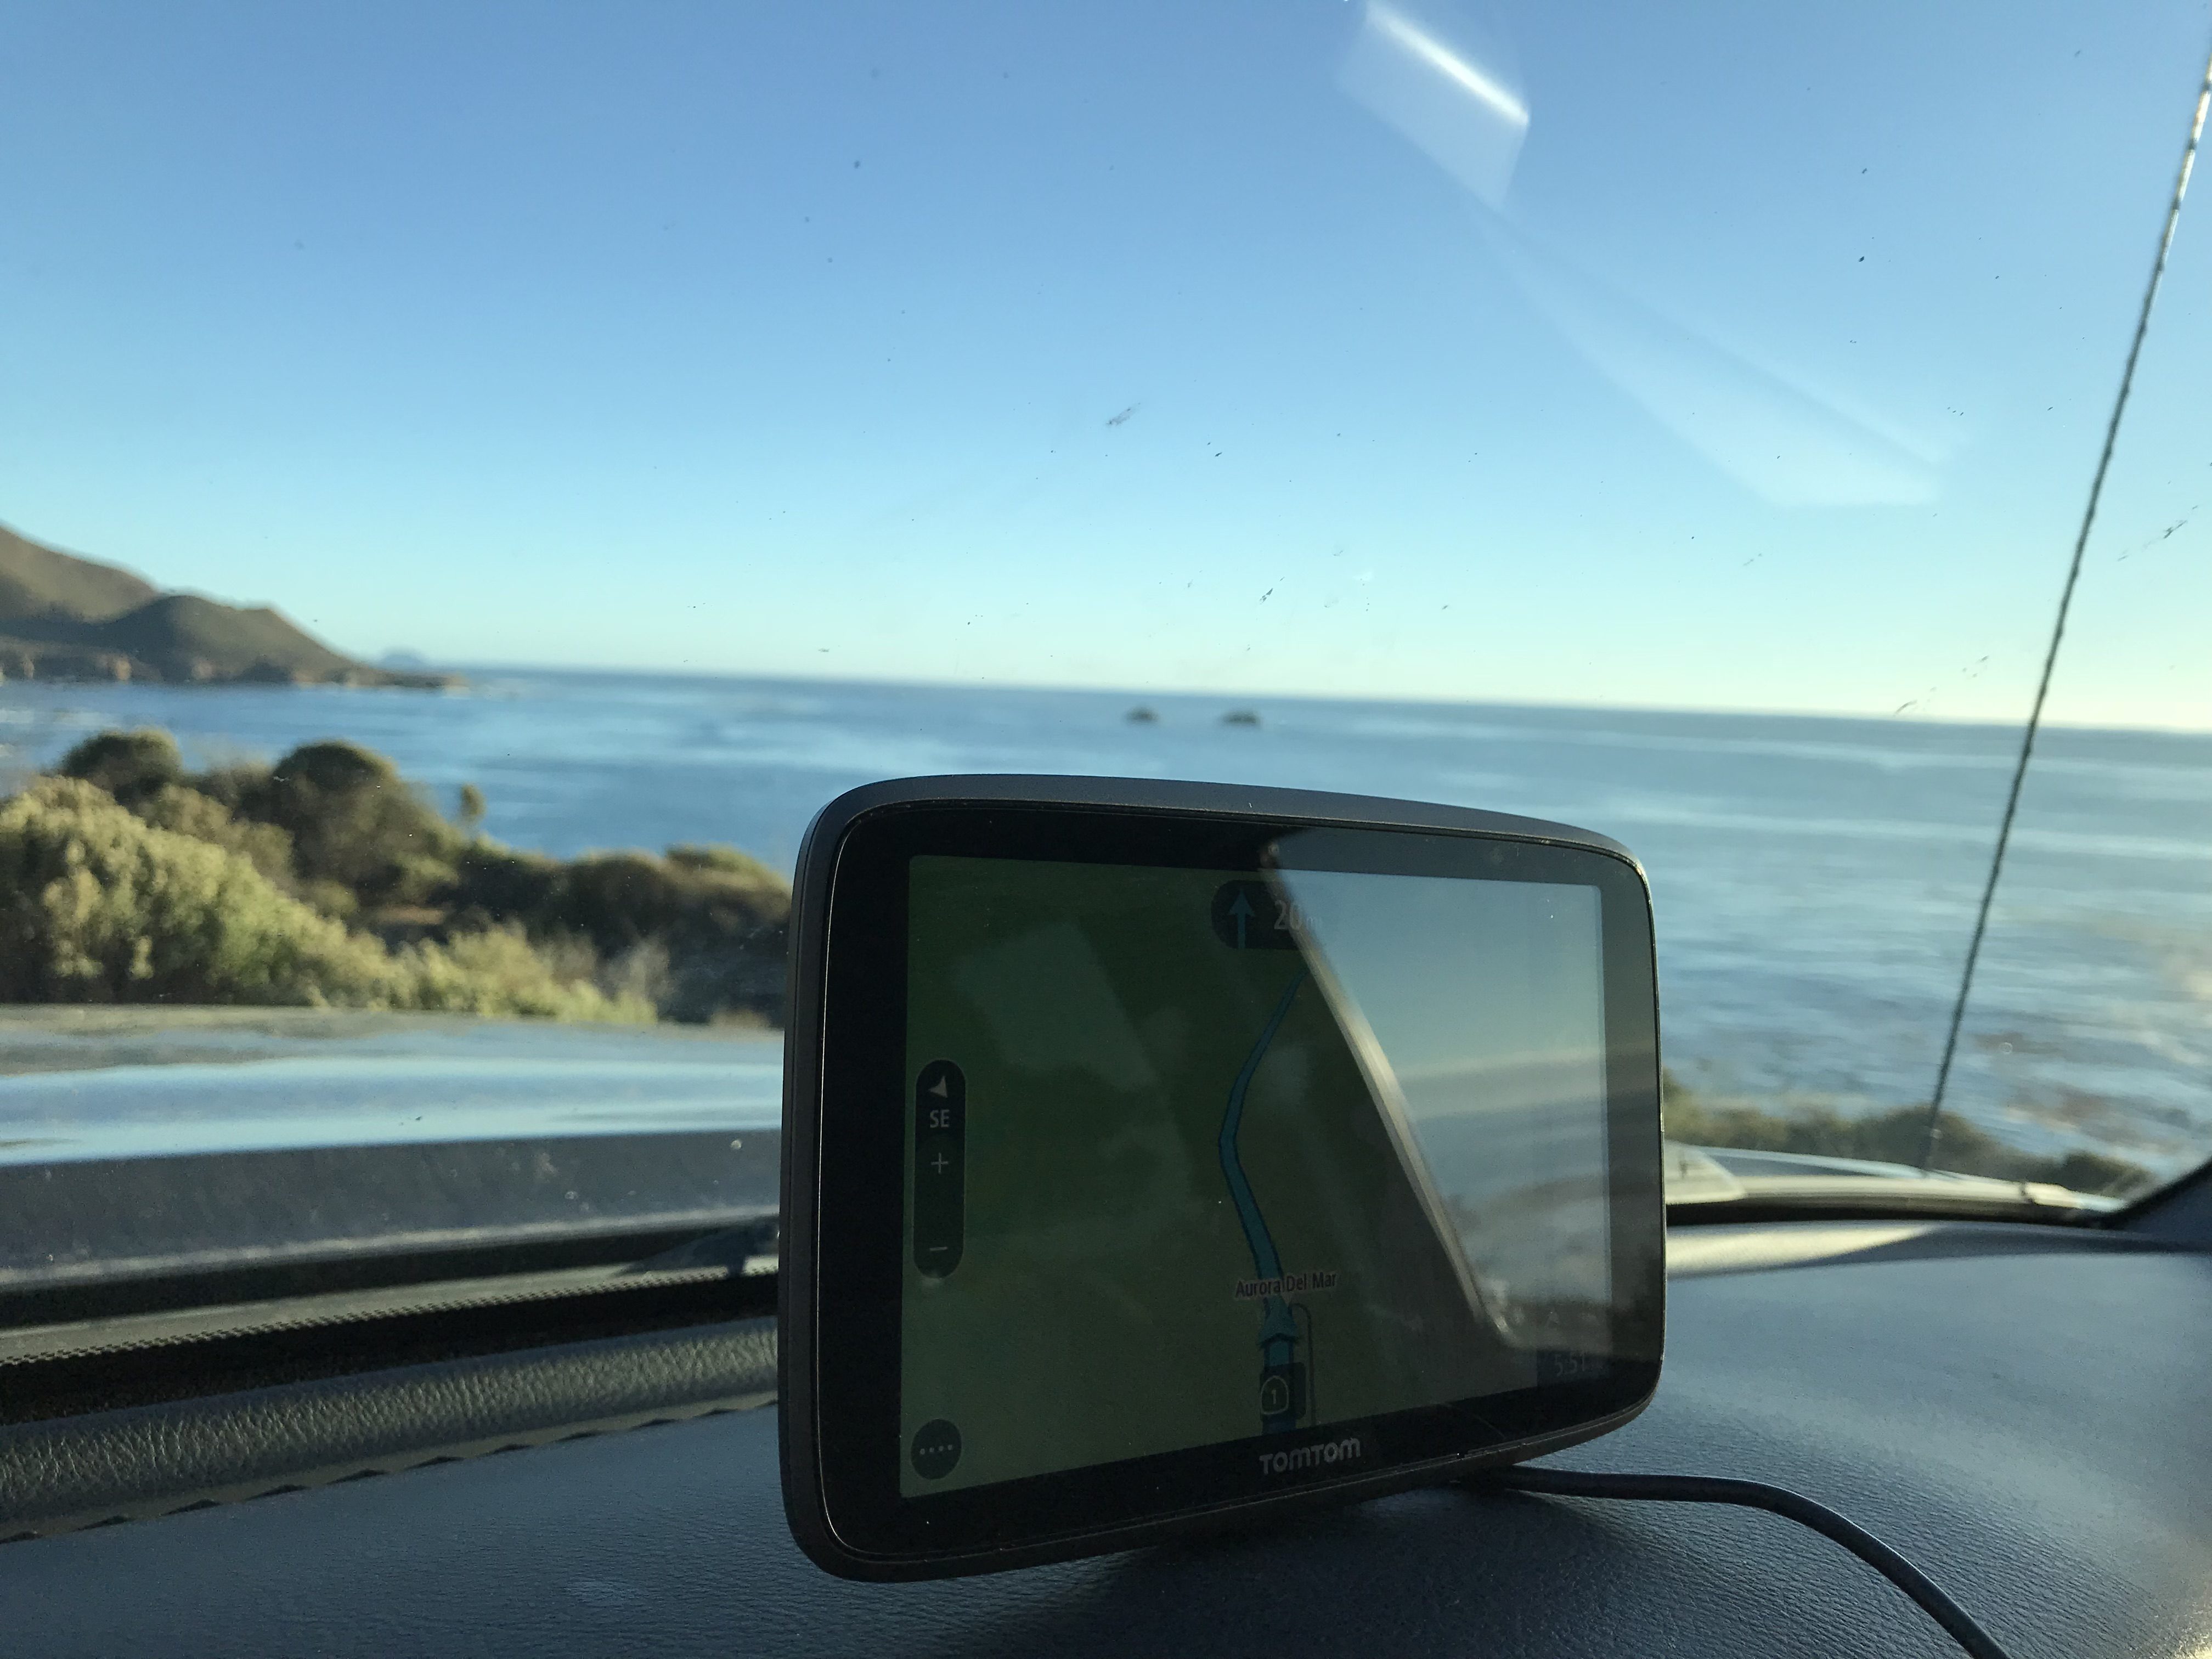 TomTom Go Camper - Final thoughts